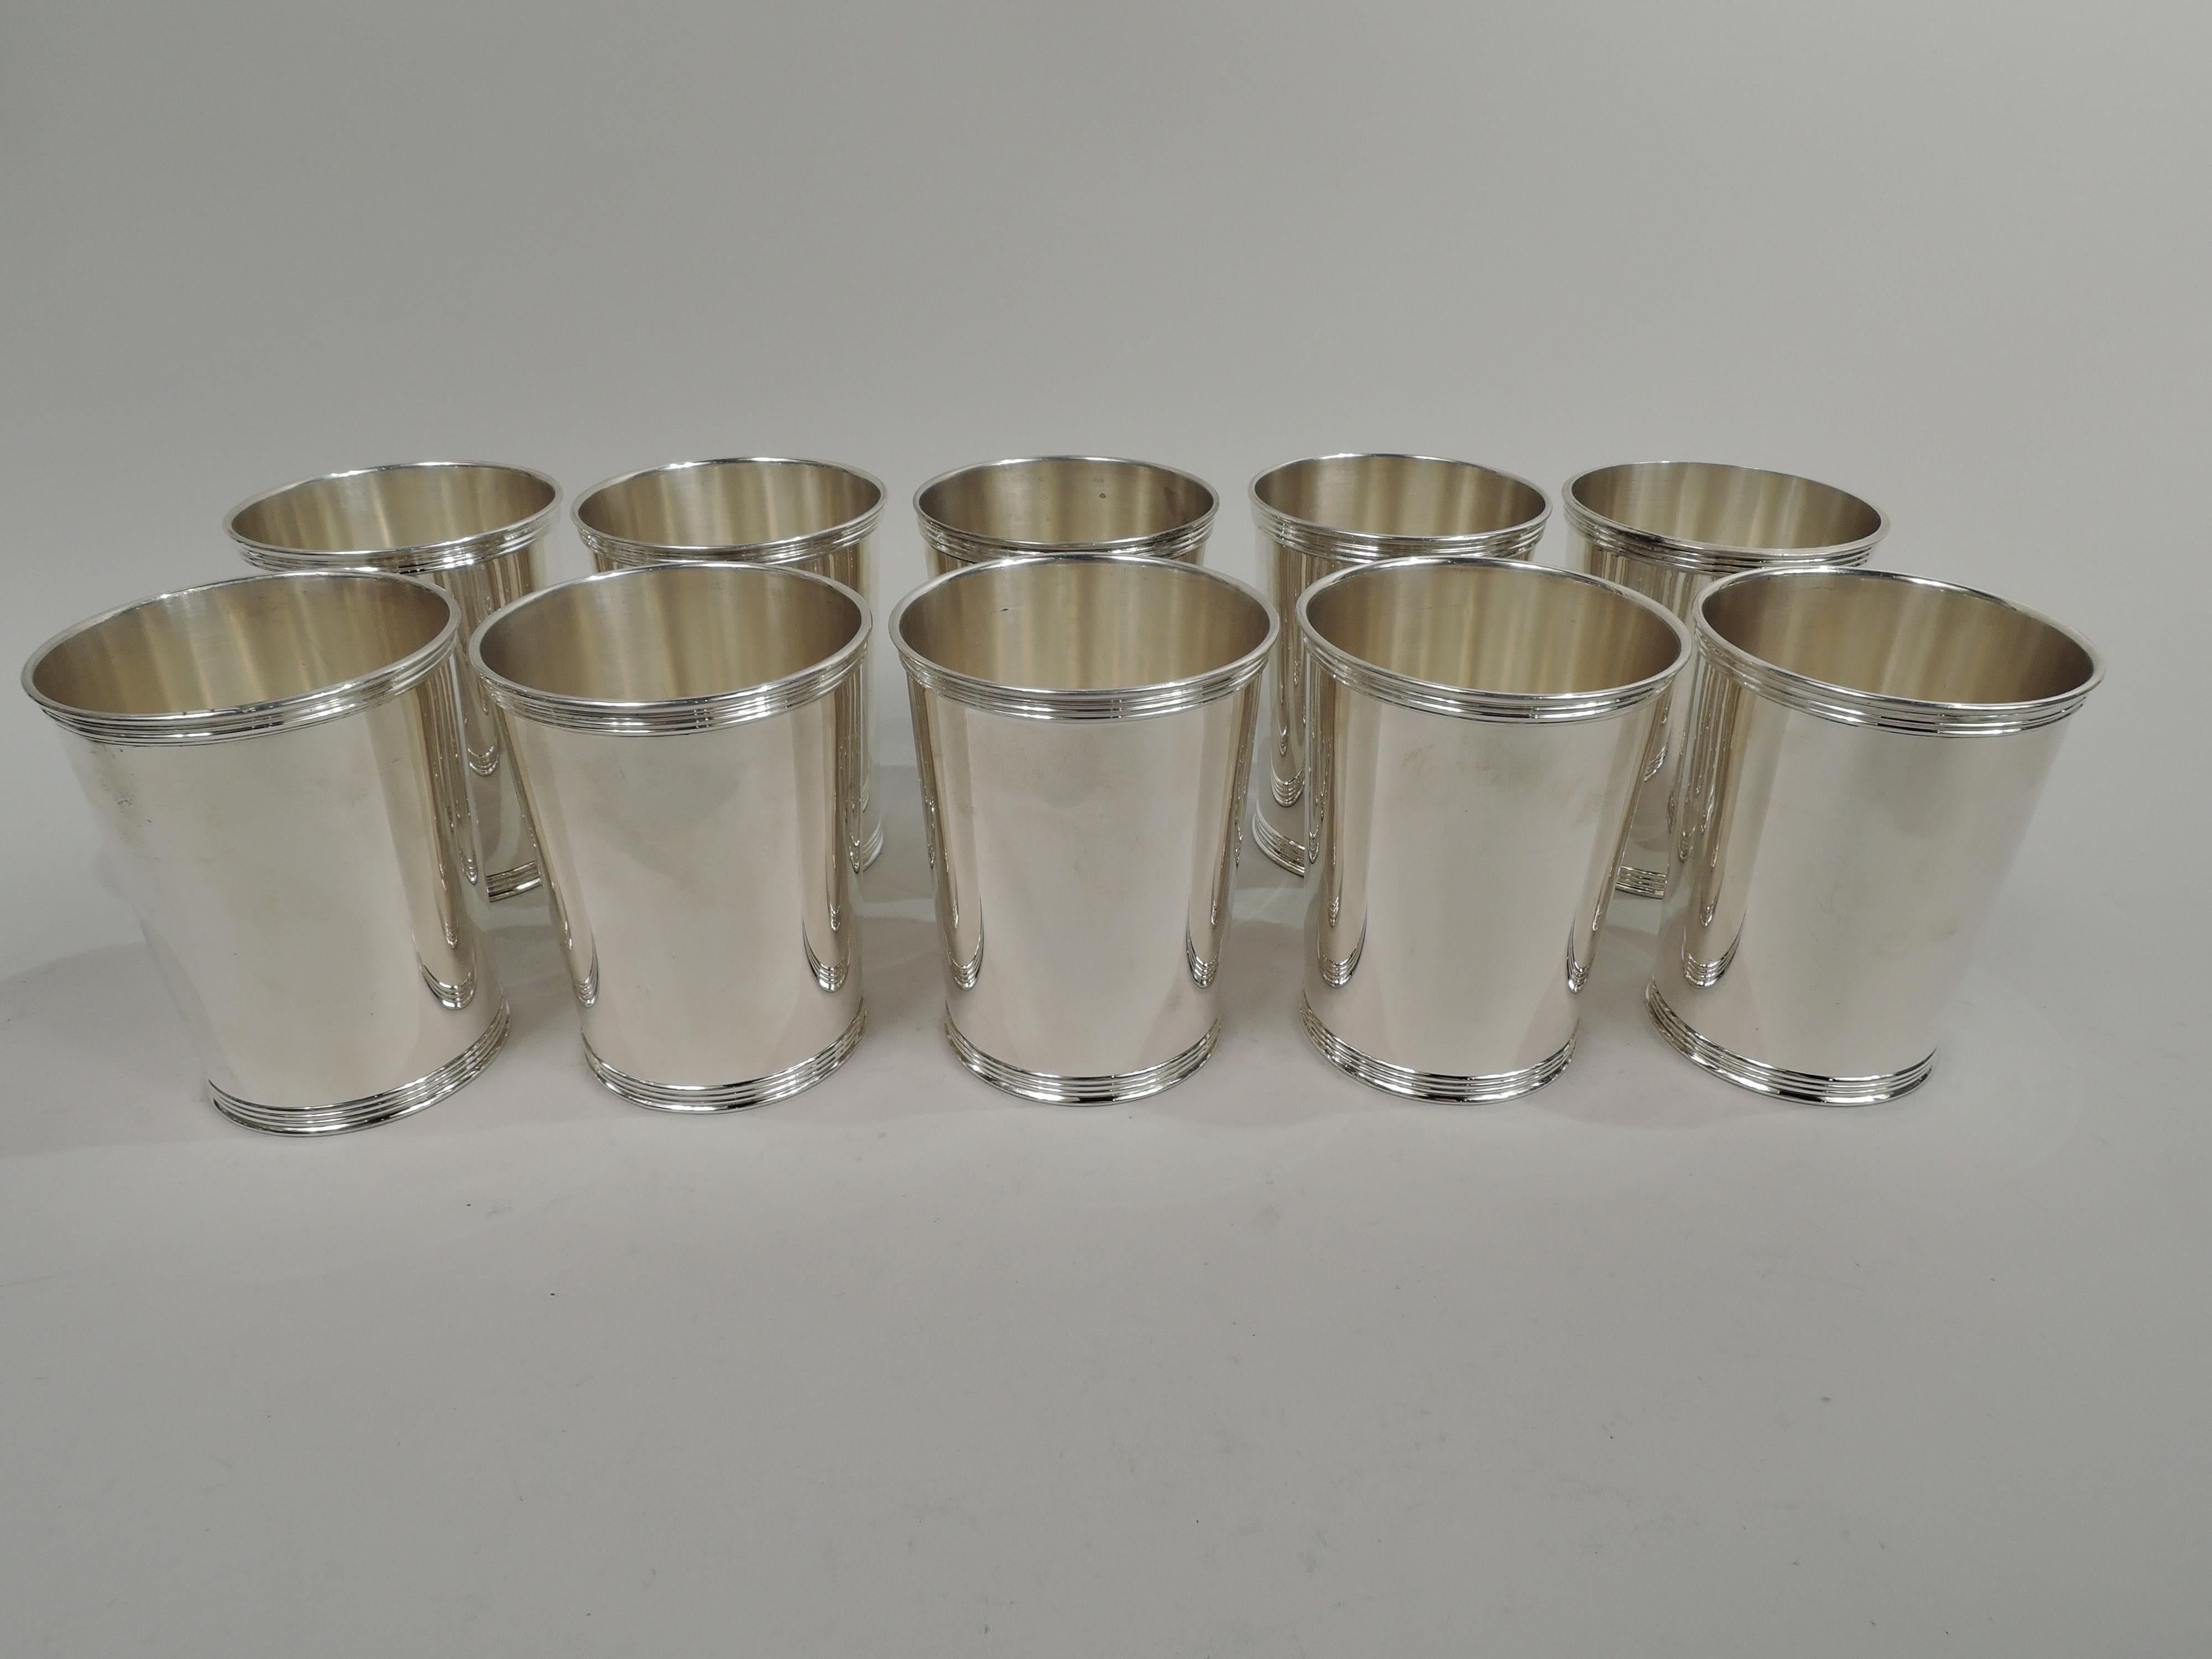 Ten sterling silver mint juleps. Made by Manchester in Providence. Each: Straight and tapering sides, and reeded rim and base. A great set to celebrate the return to real life face time. Fully marked including maker’s stamp and no. 3759. Total